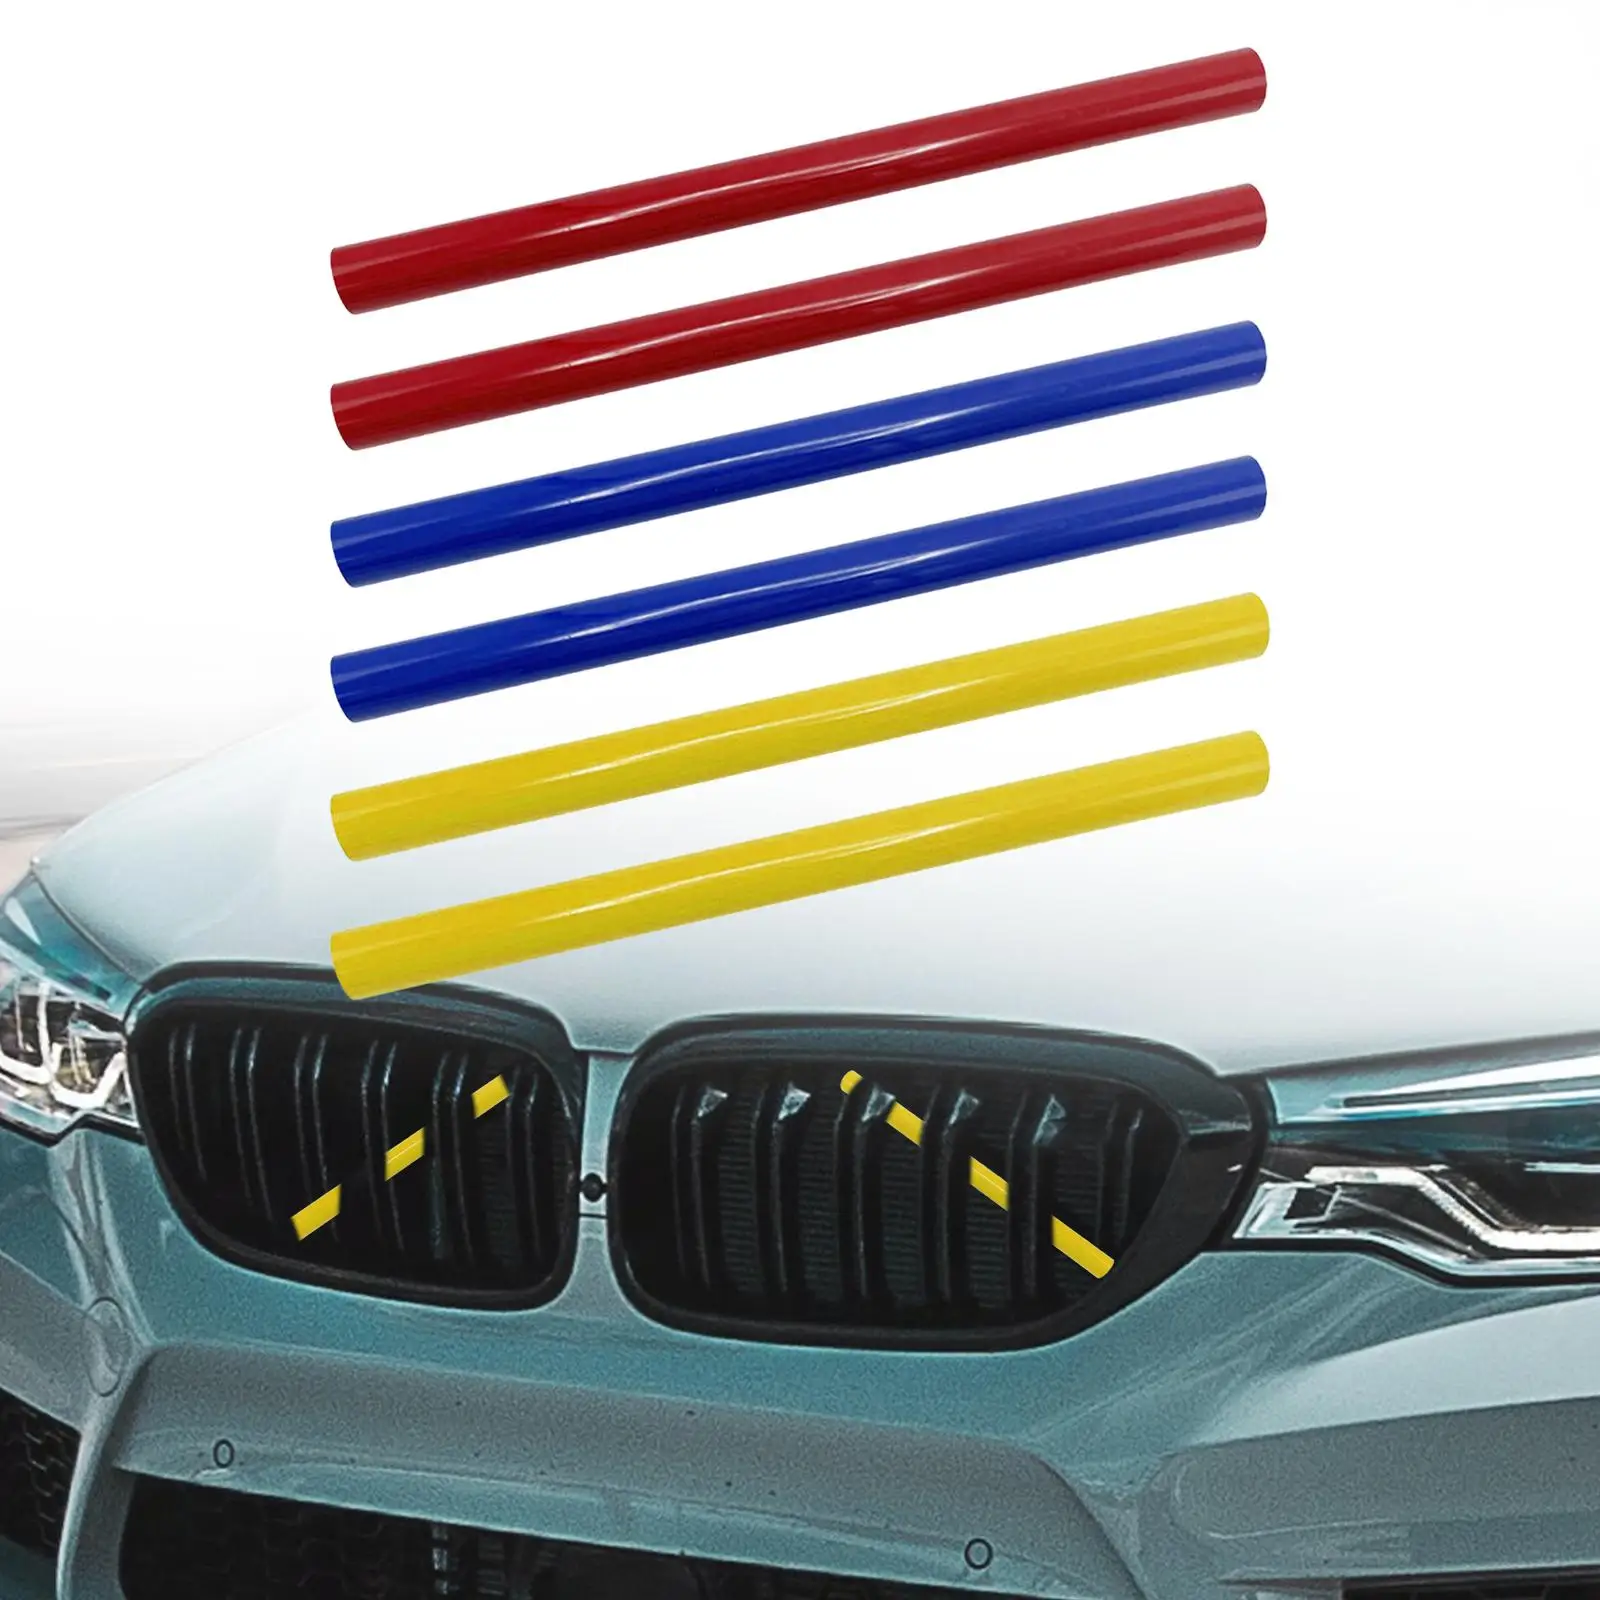 2pcs Front Grille Trim Strips Cover for BMW 1 Series 118i 125i